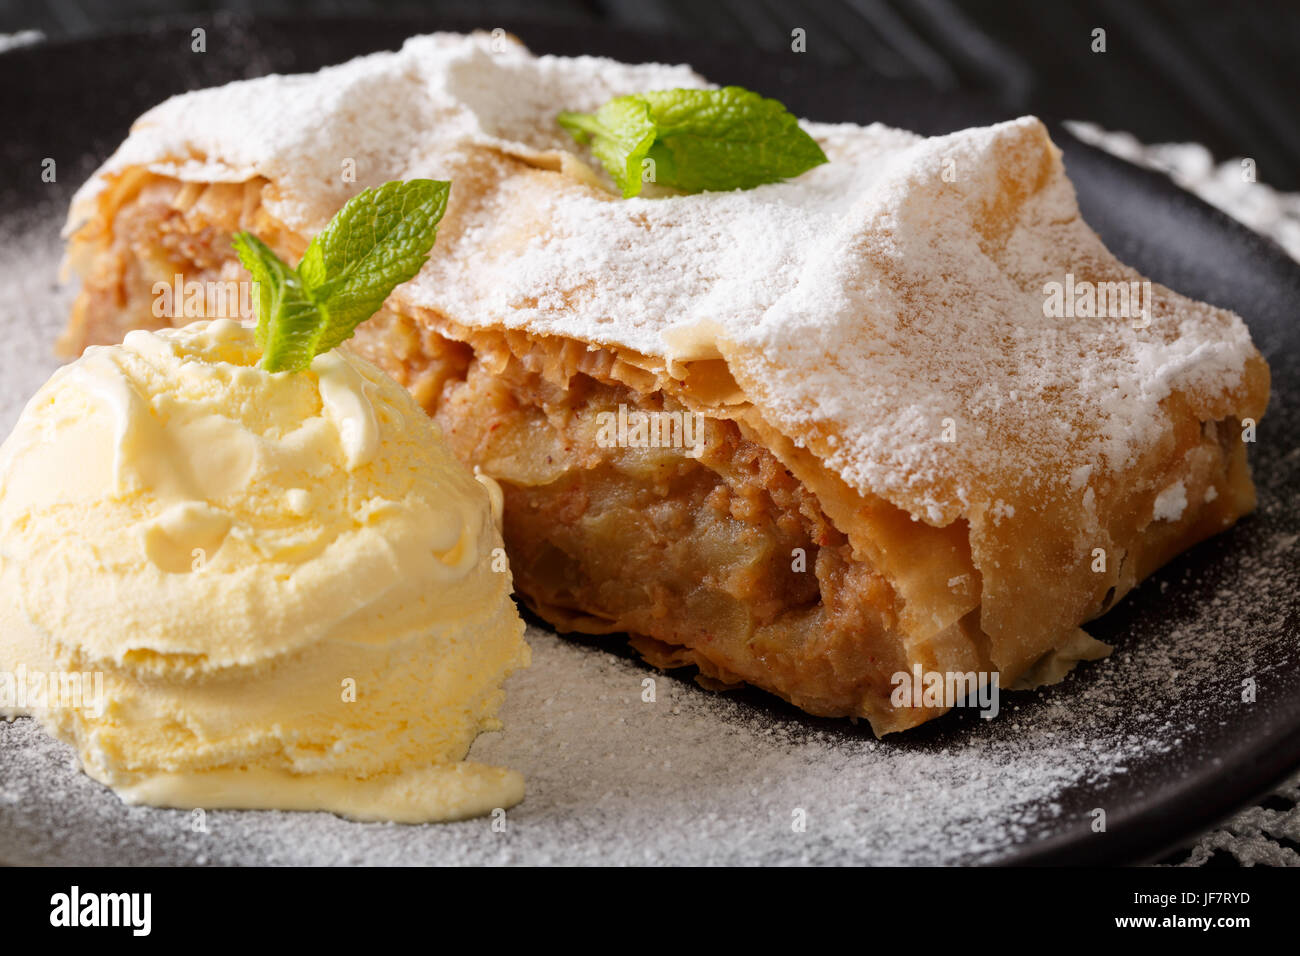 Austrian traditional apple strudel with ice cream and mint closeup on a plate. Horizontal Stock Photo